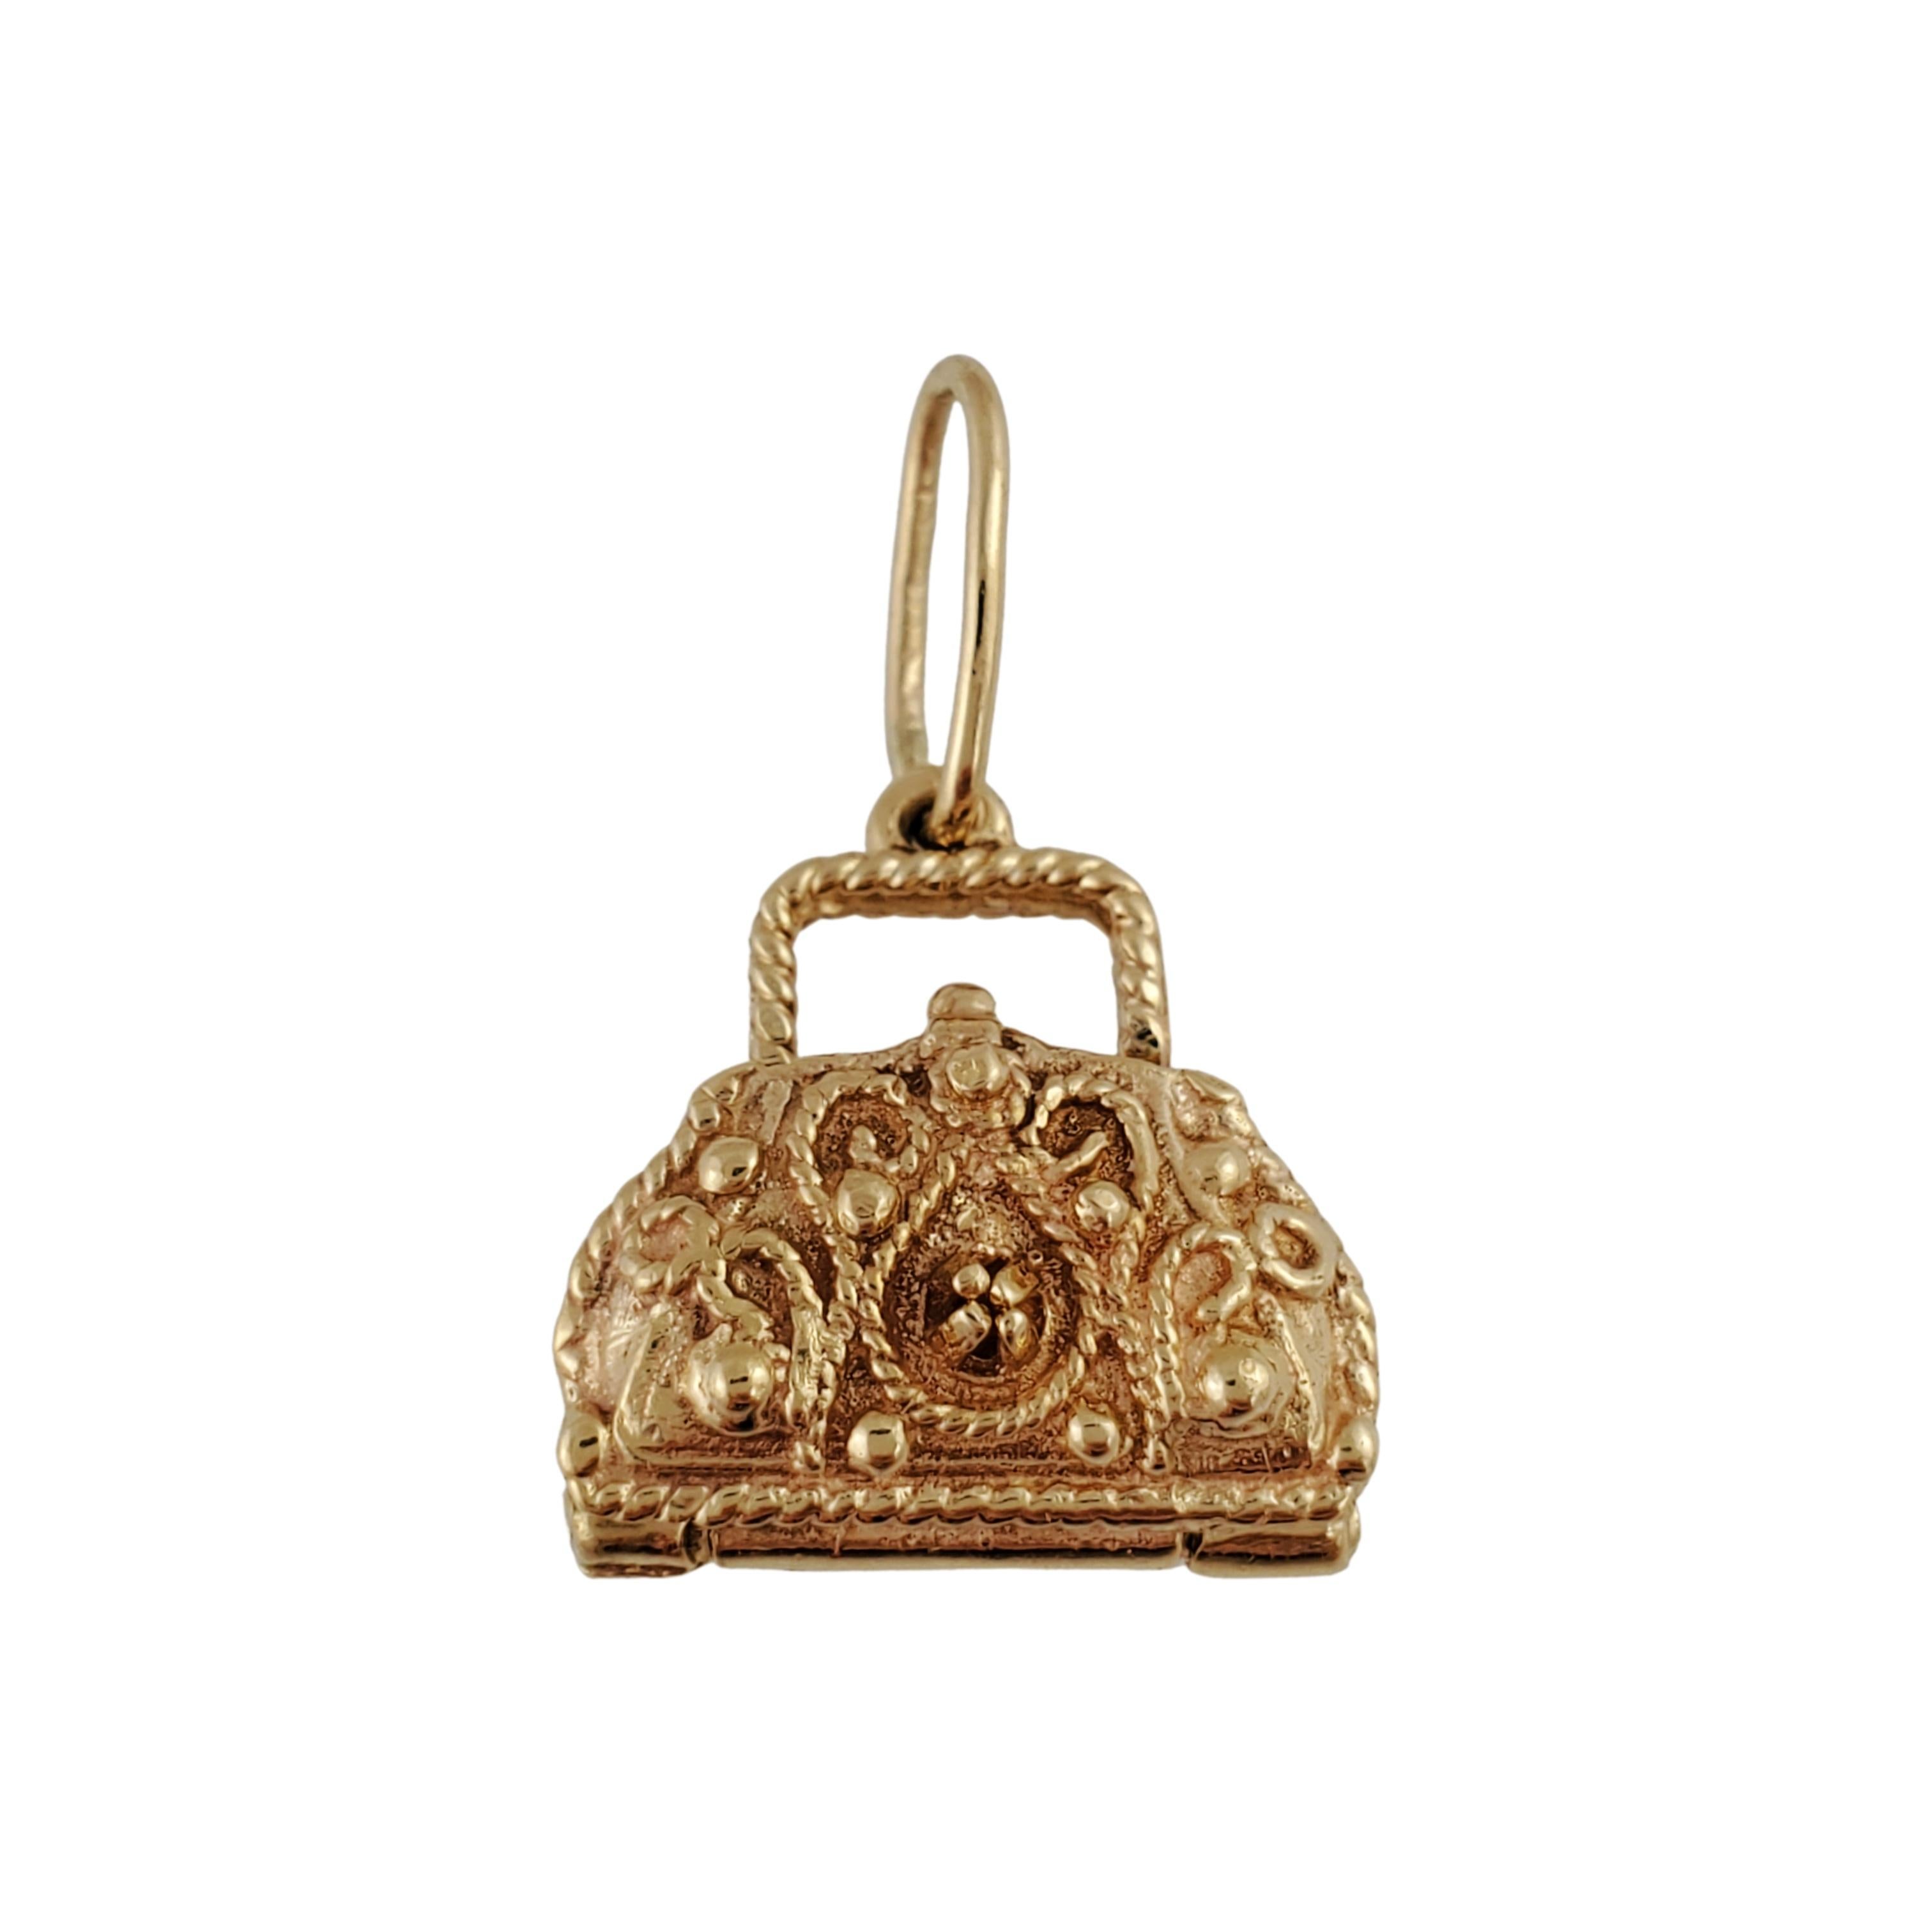 10K Yellow Gold Purse Charm 

Beautiful vintage 10K yellow gold purse charm for that person who loves purses! 

Size: 14.96mm X 14.95mm

Weight:  3.8gr /  2.4dwt

Hallmark: 

Very good condition, professionally polished.

Will come packaged in a